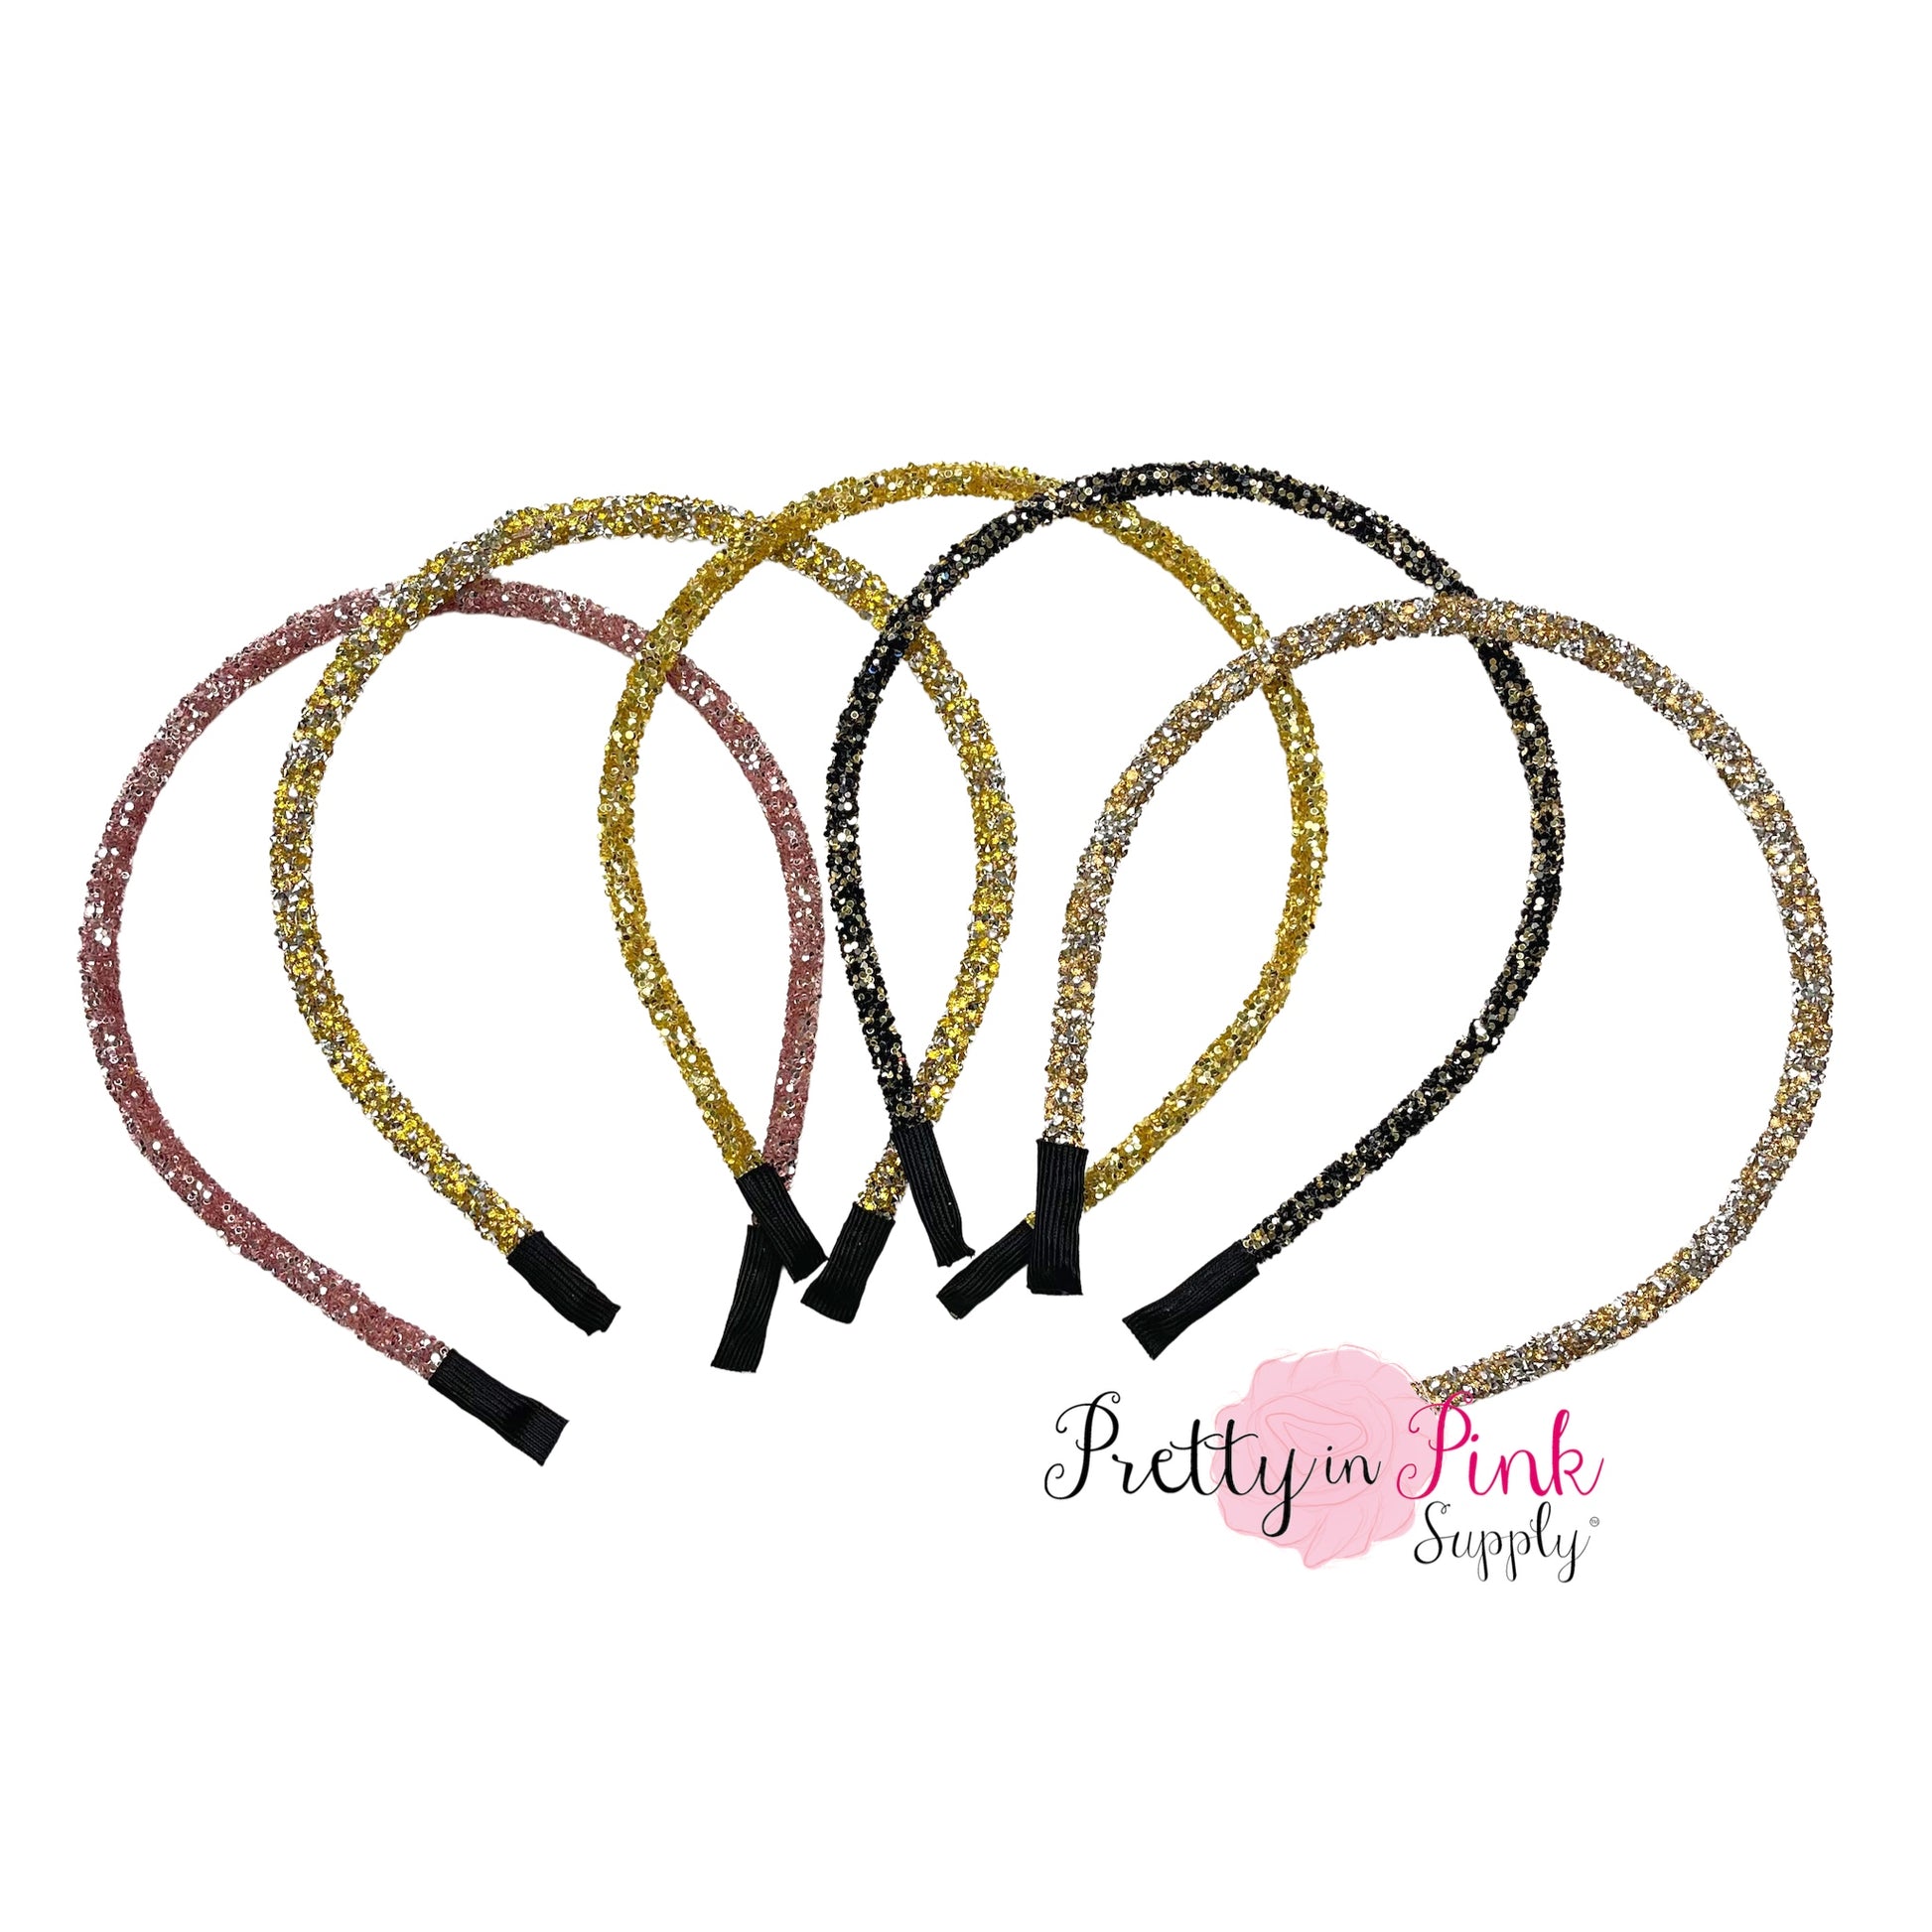 Assortment of gold, silver, and pink shiny glitter and gem lined headbands.